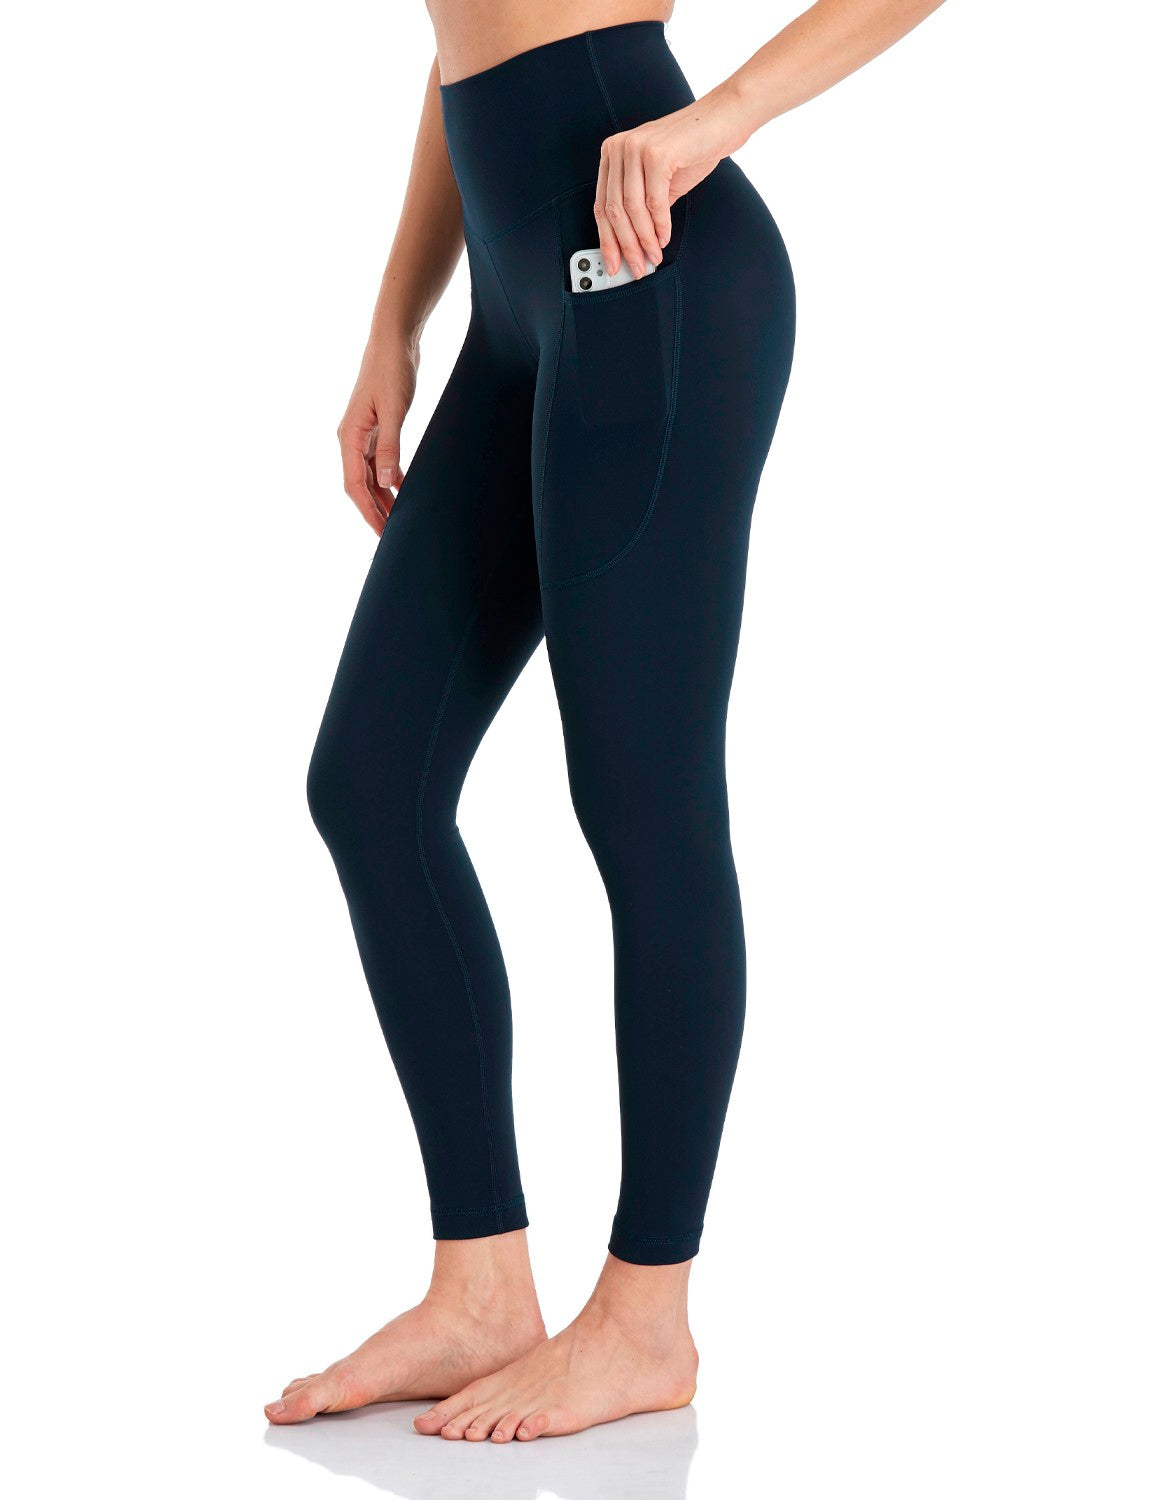 HeyNuts Pure&Plain Workout Pro 7/8 Leggings For Women, High Waisted  Athletic Compression Tummy Control Yoga Pants 25 Java Coffee XS